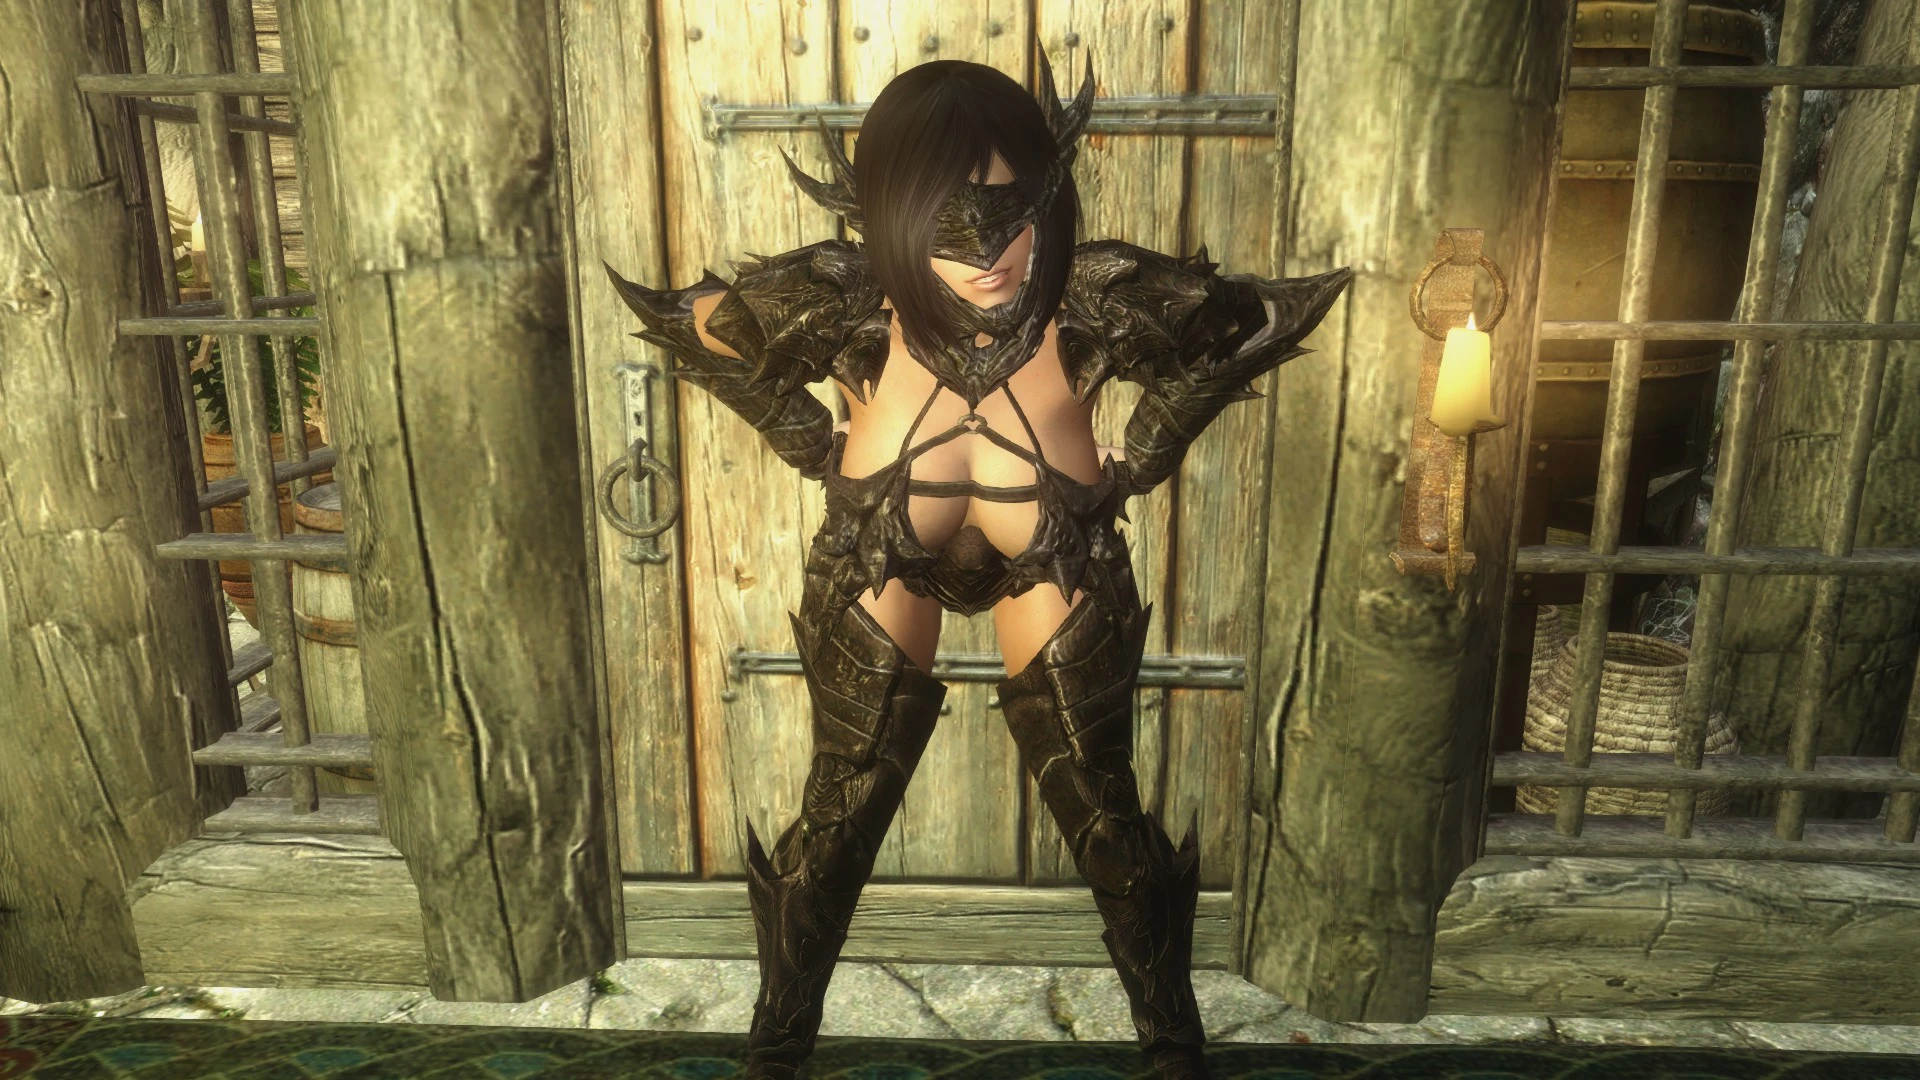 anthony tolentino recommends Skyrim Bathing Suit Mod